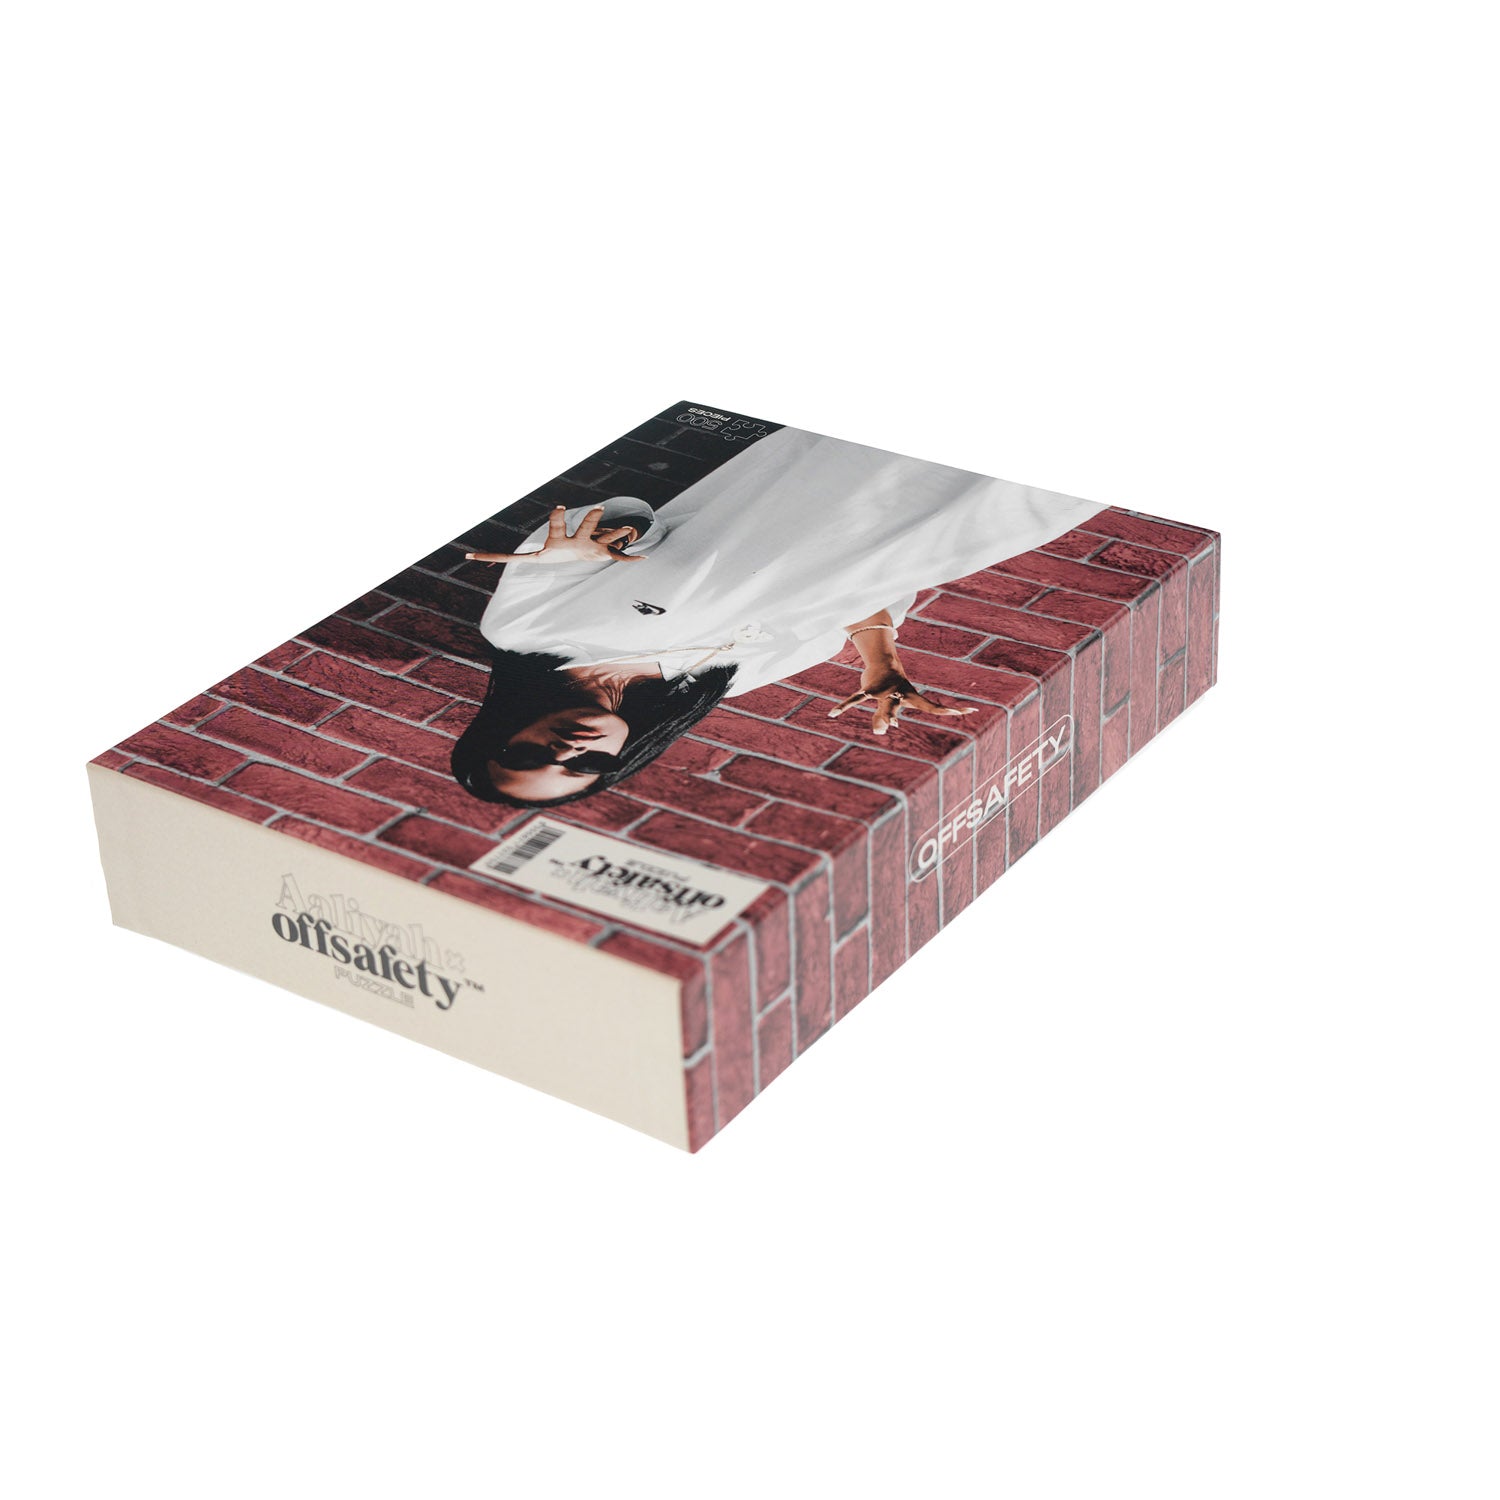 Aaliyah x Offsafety Puzzle Series 1